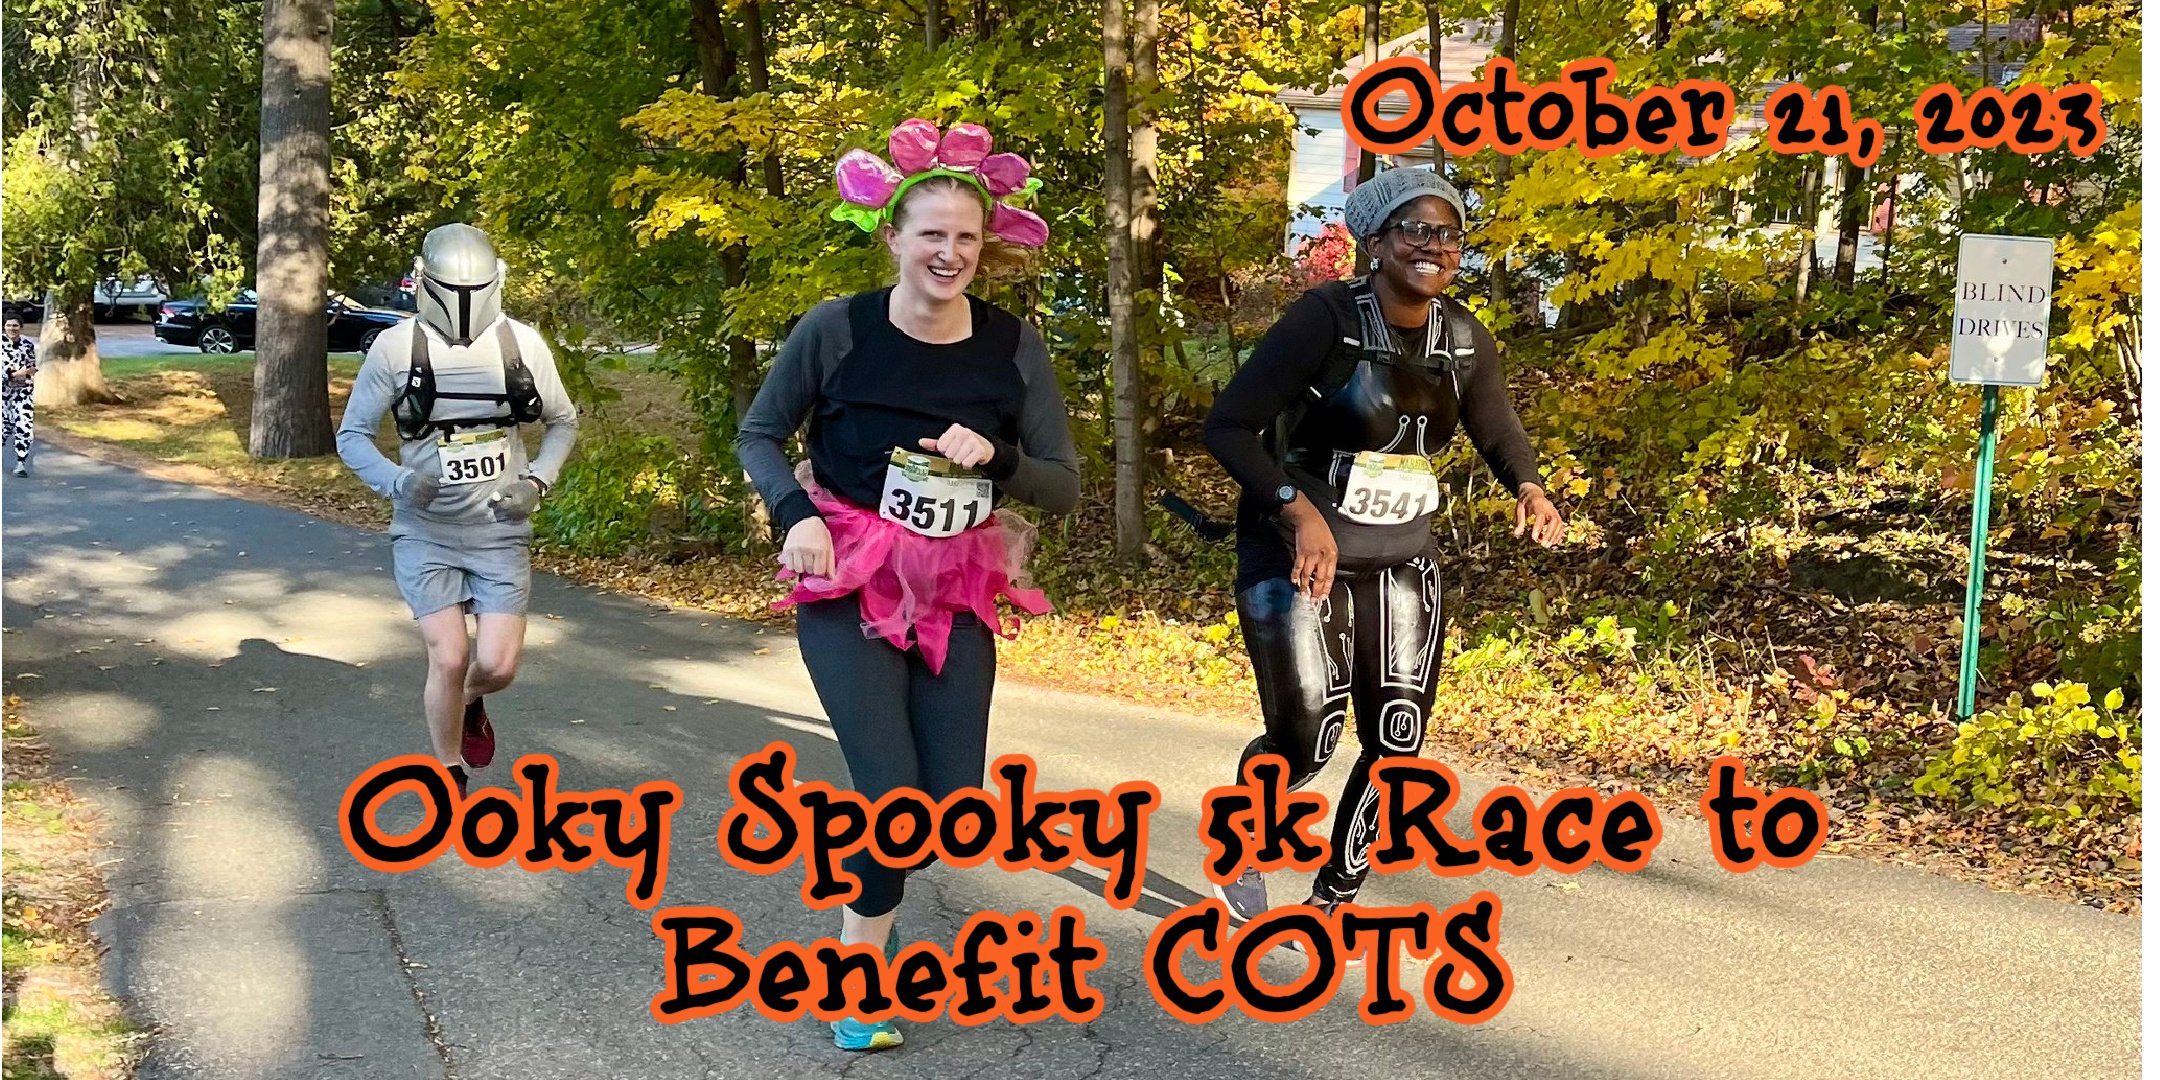 Costumed runners at the Ooky Spooky 5k